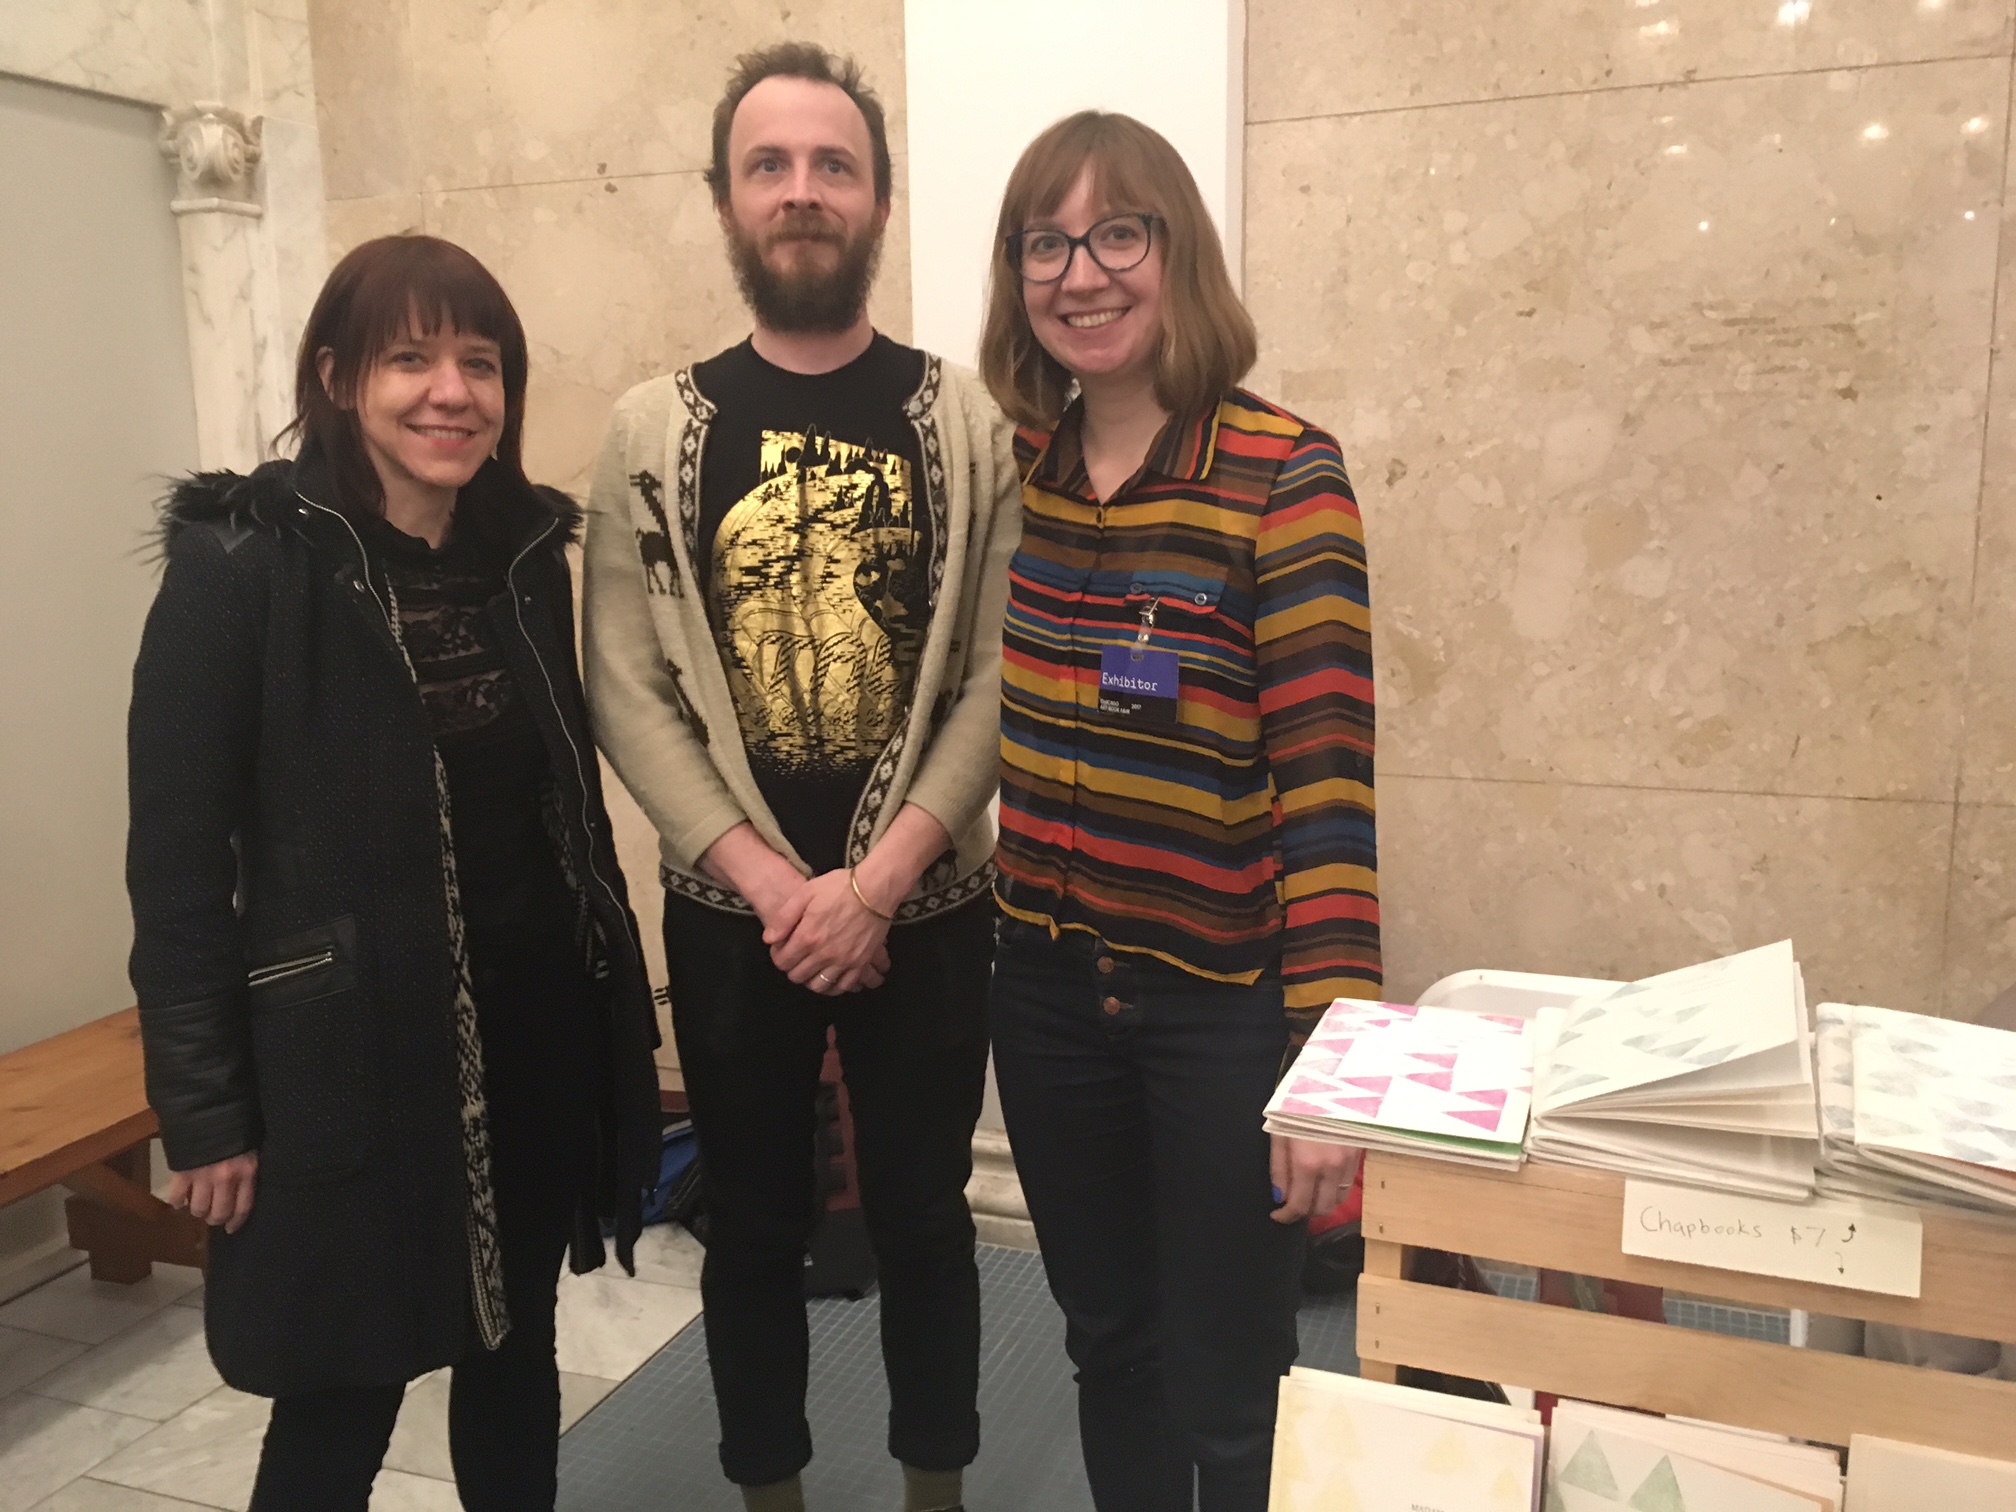 Meekling Press founders from right to left: Anne Yoder, Nicholas Davis, and Rebecca Elliot at the Chicago Art Book Fair.